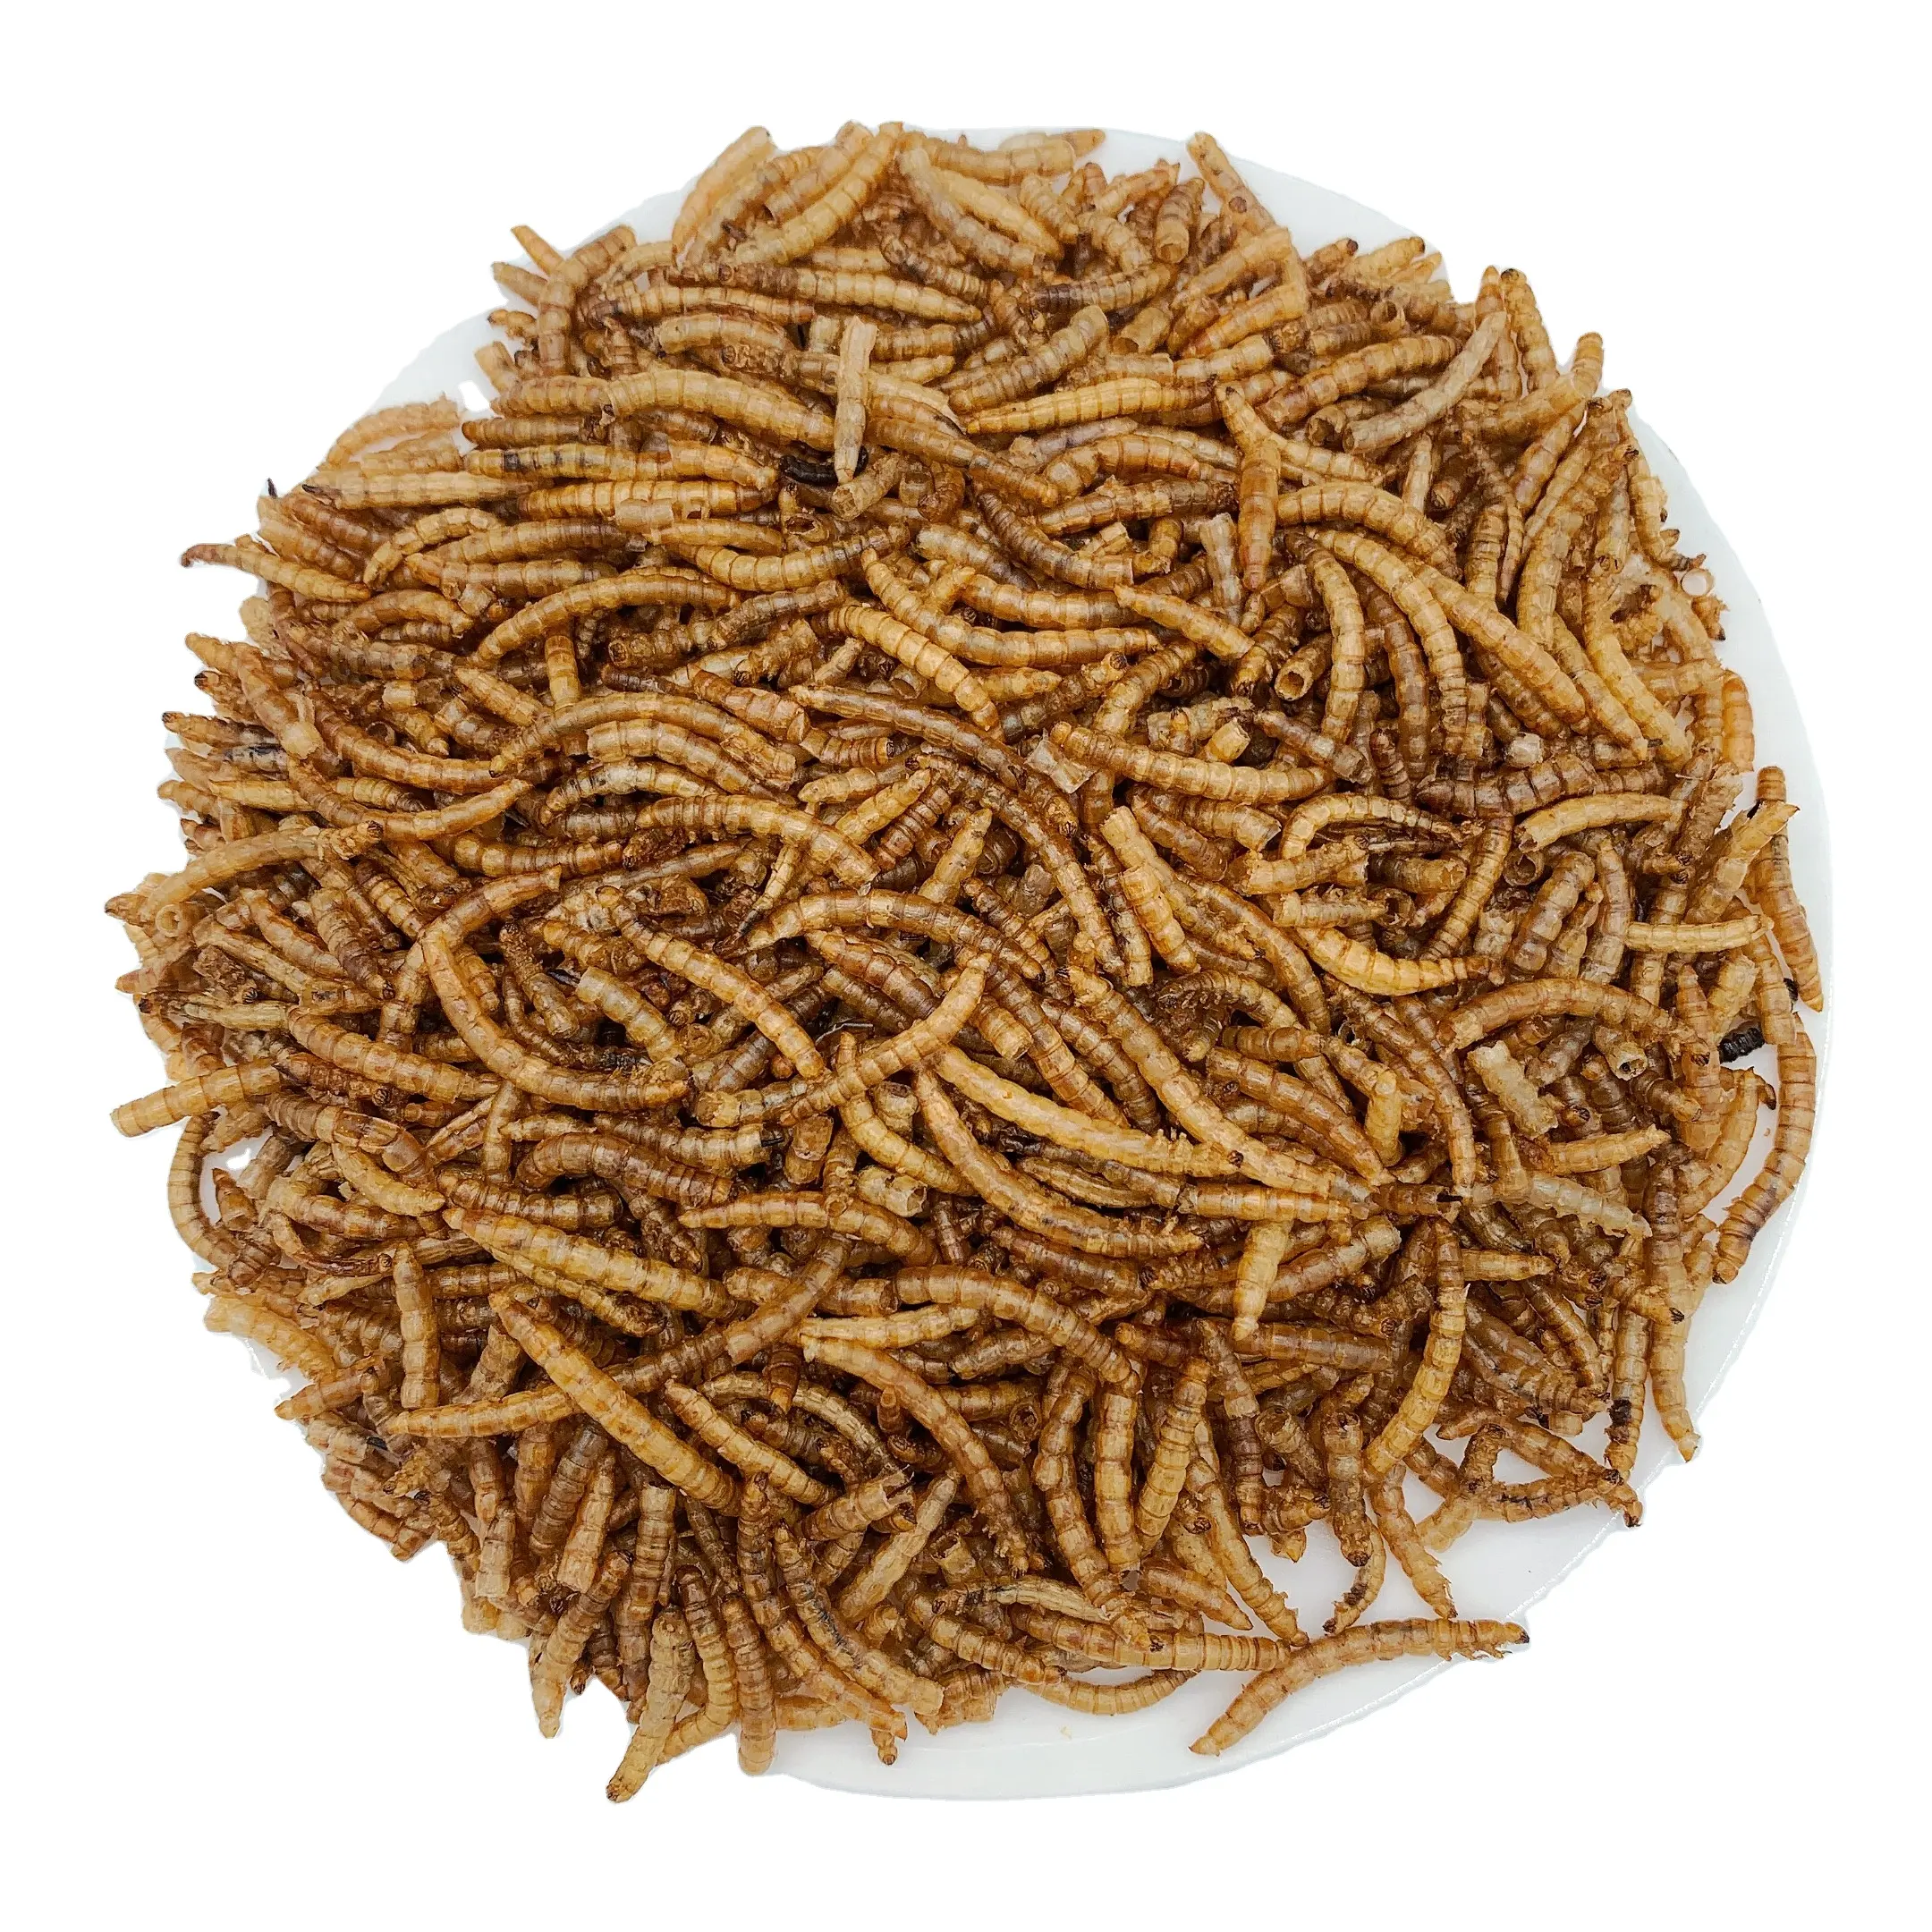 Factory Direct High Protein Larvae Rich Nutrition Edible Insects Dried Mealworm Birds Food Amphibians Aquatic Bait Wholesale